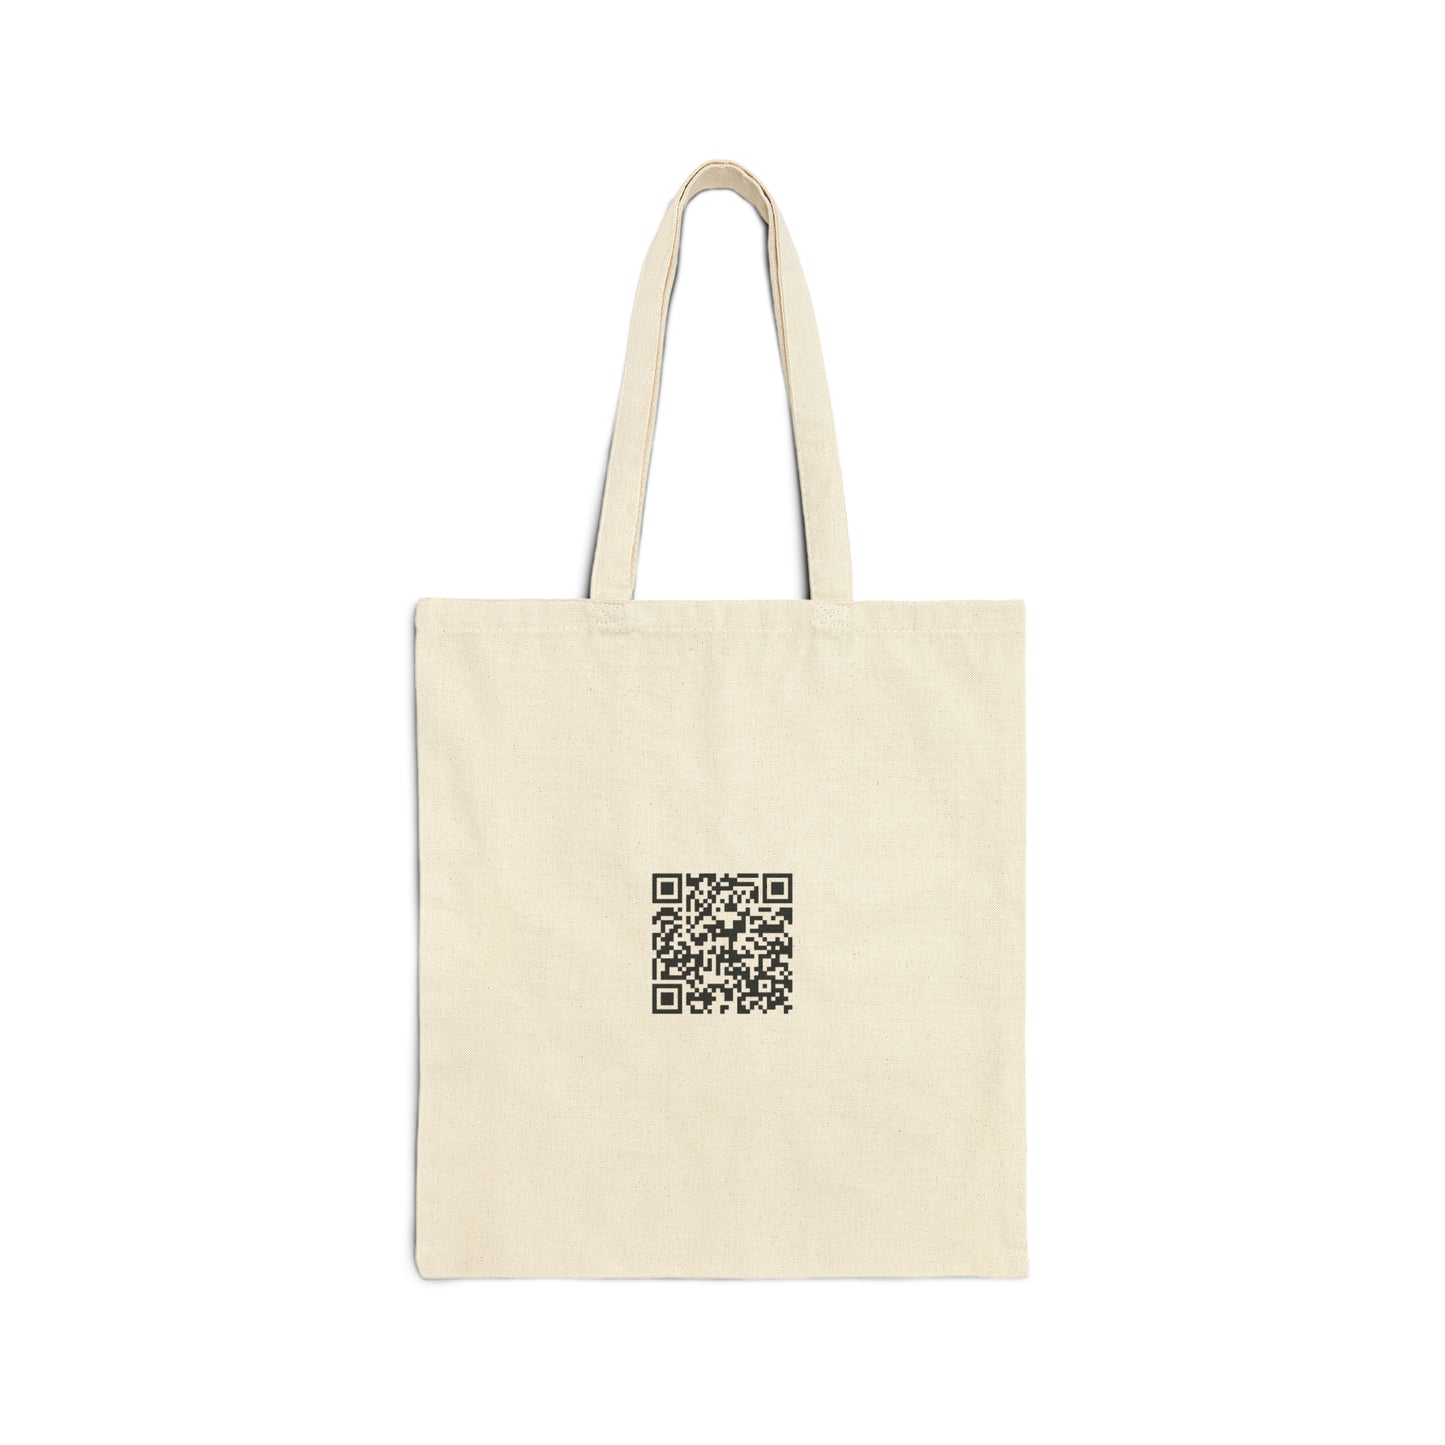 The Wind Whispers Her Name - Cotton Canvas Tote Bag